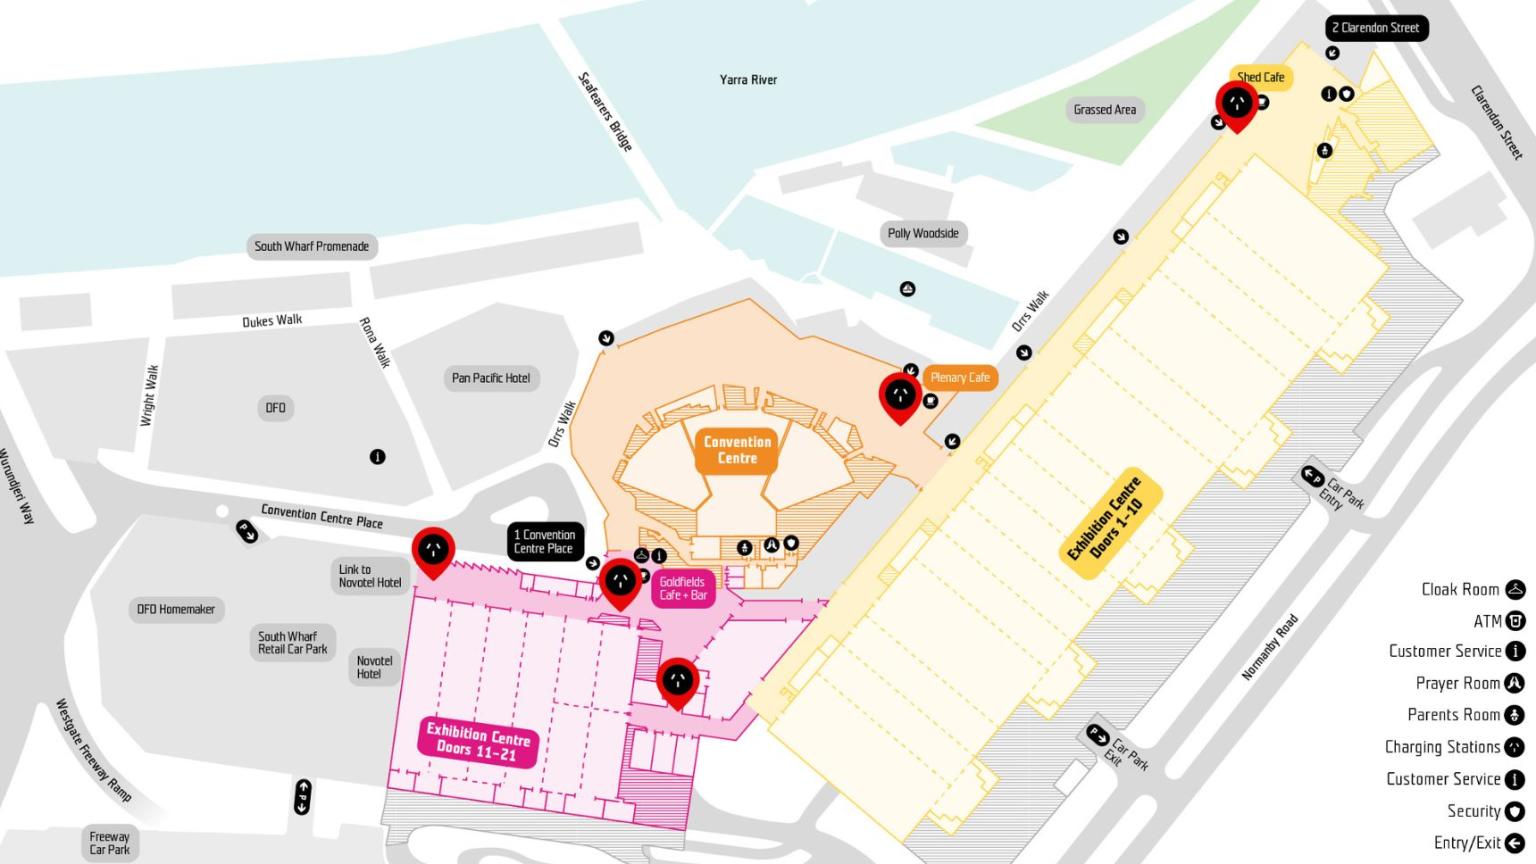 Floor plan of MCEC with a pin point highlighting the location of charging stations.  